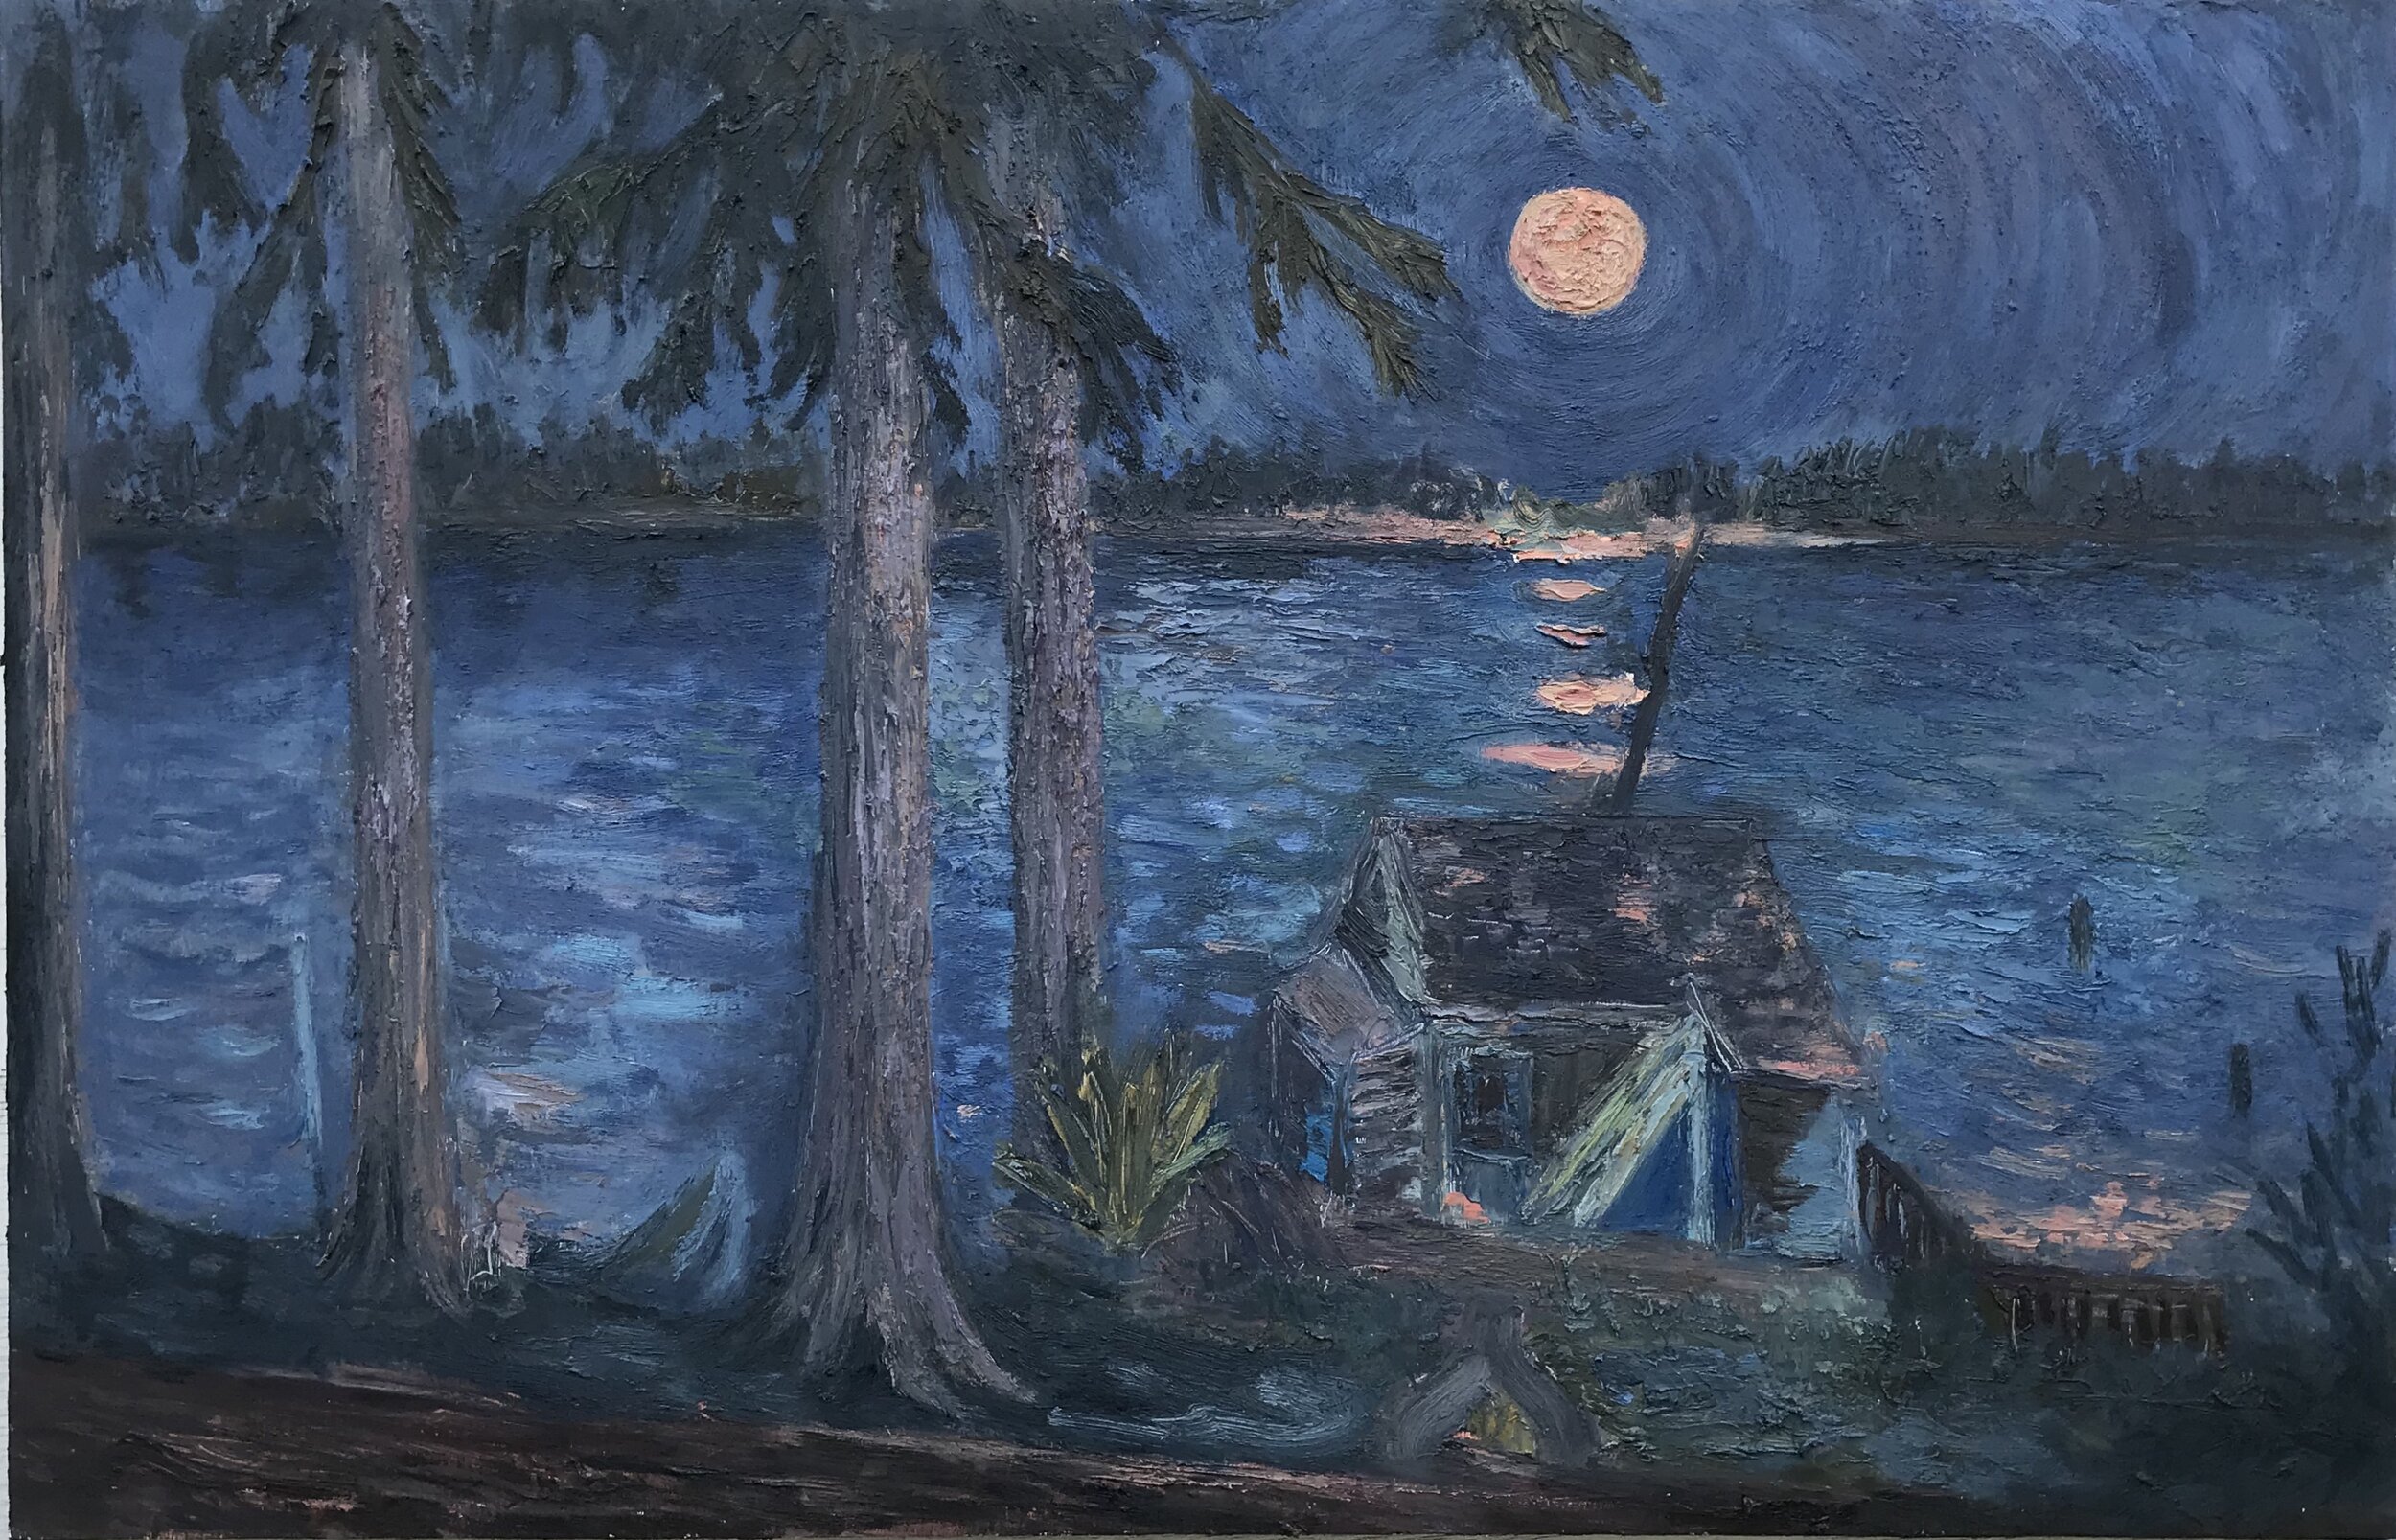 Rose Moon over the Passage, oil on panel, 31 x 48 in.